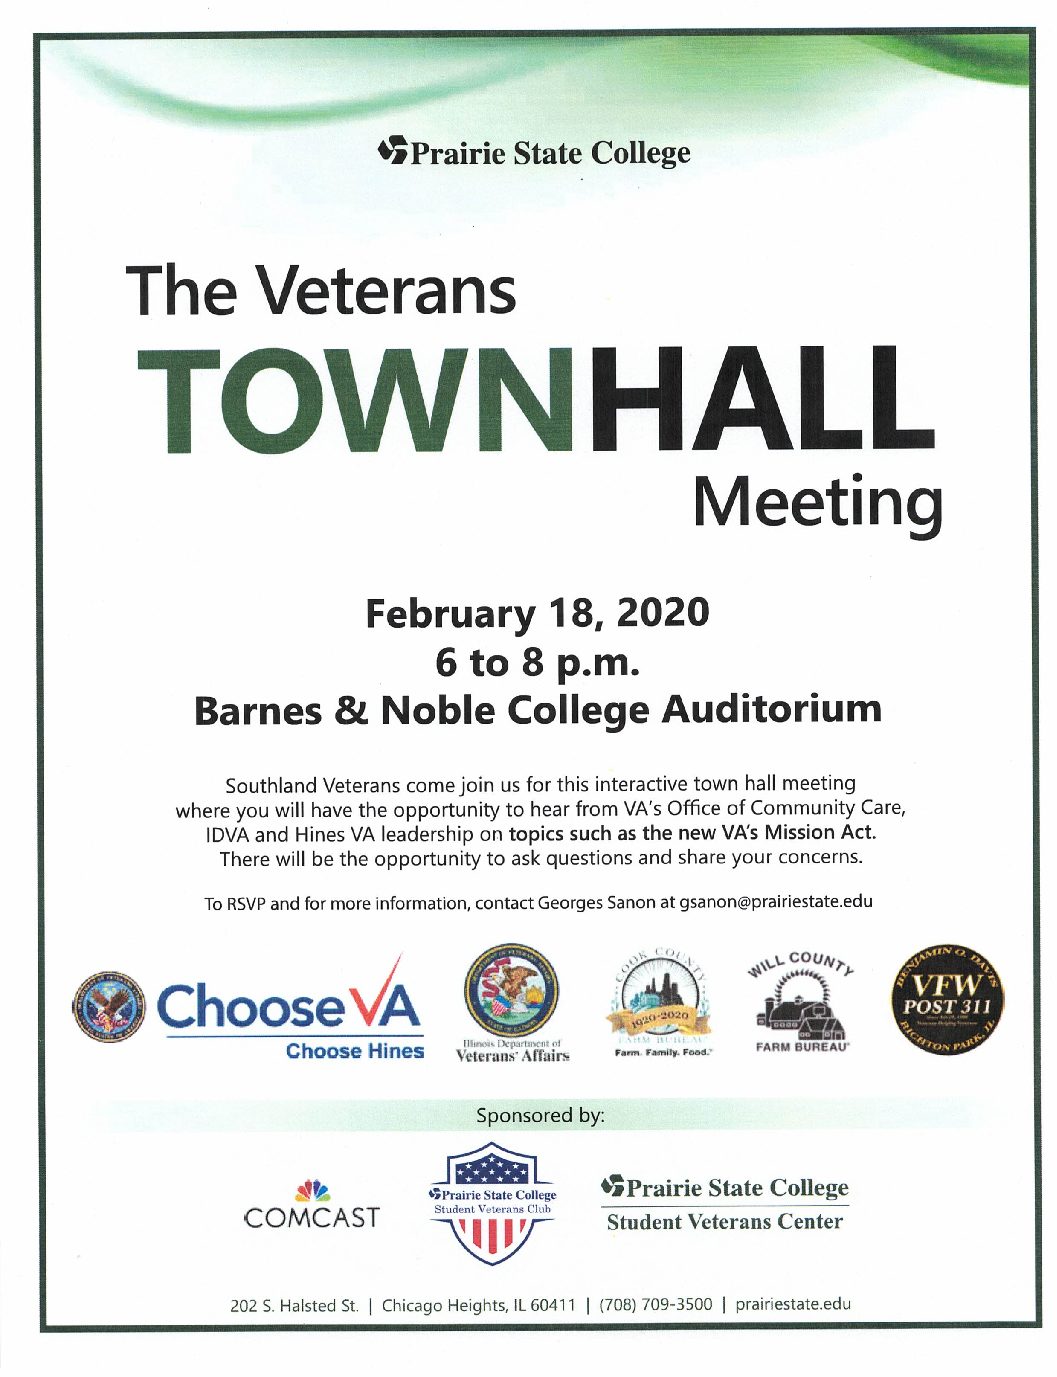 The Veterans Town Hall Meeting